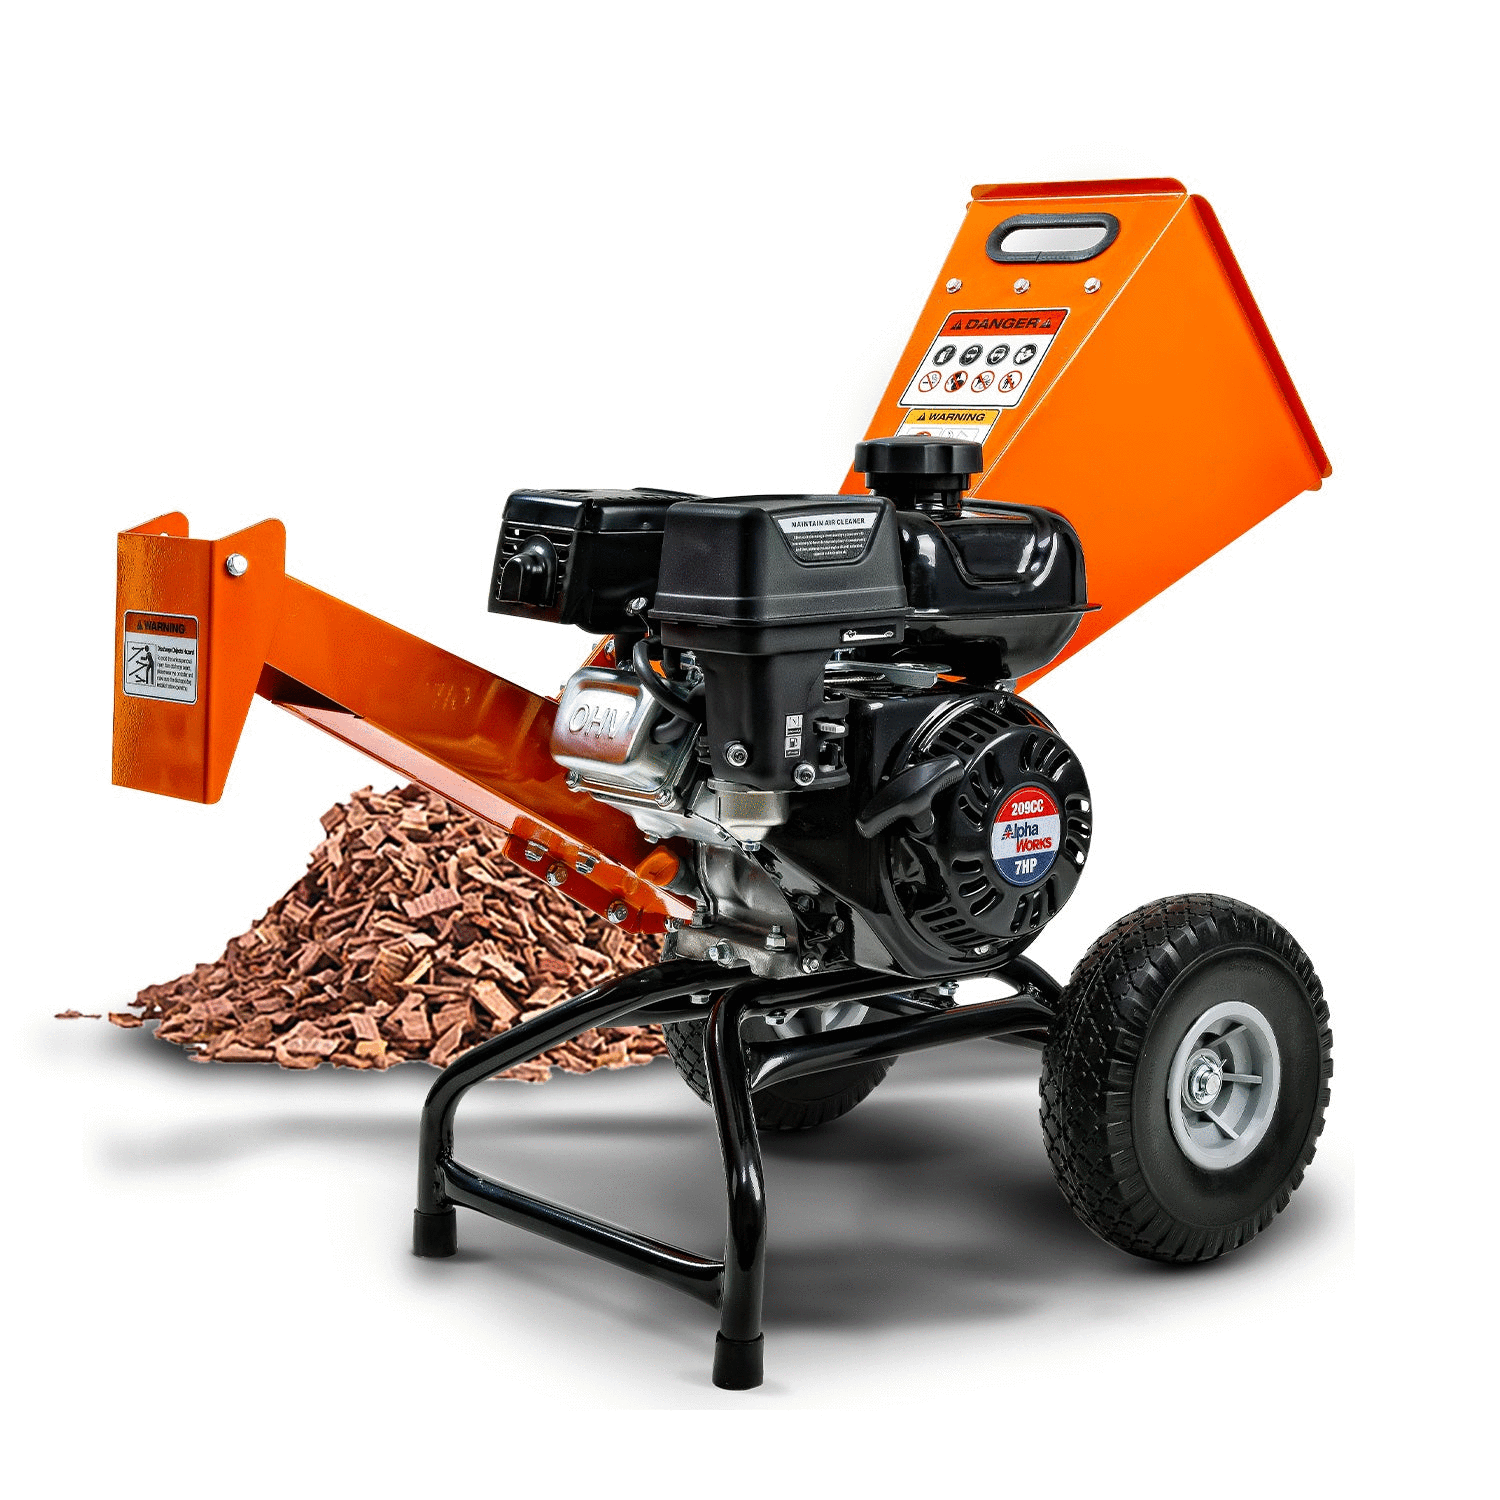 SuperHandy Wood Chipper Compact - 7HP 212CC, 3" Max Branch Capacity